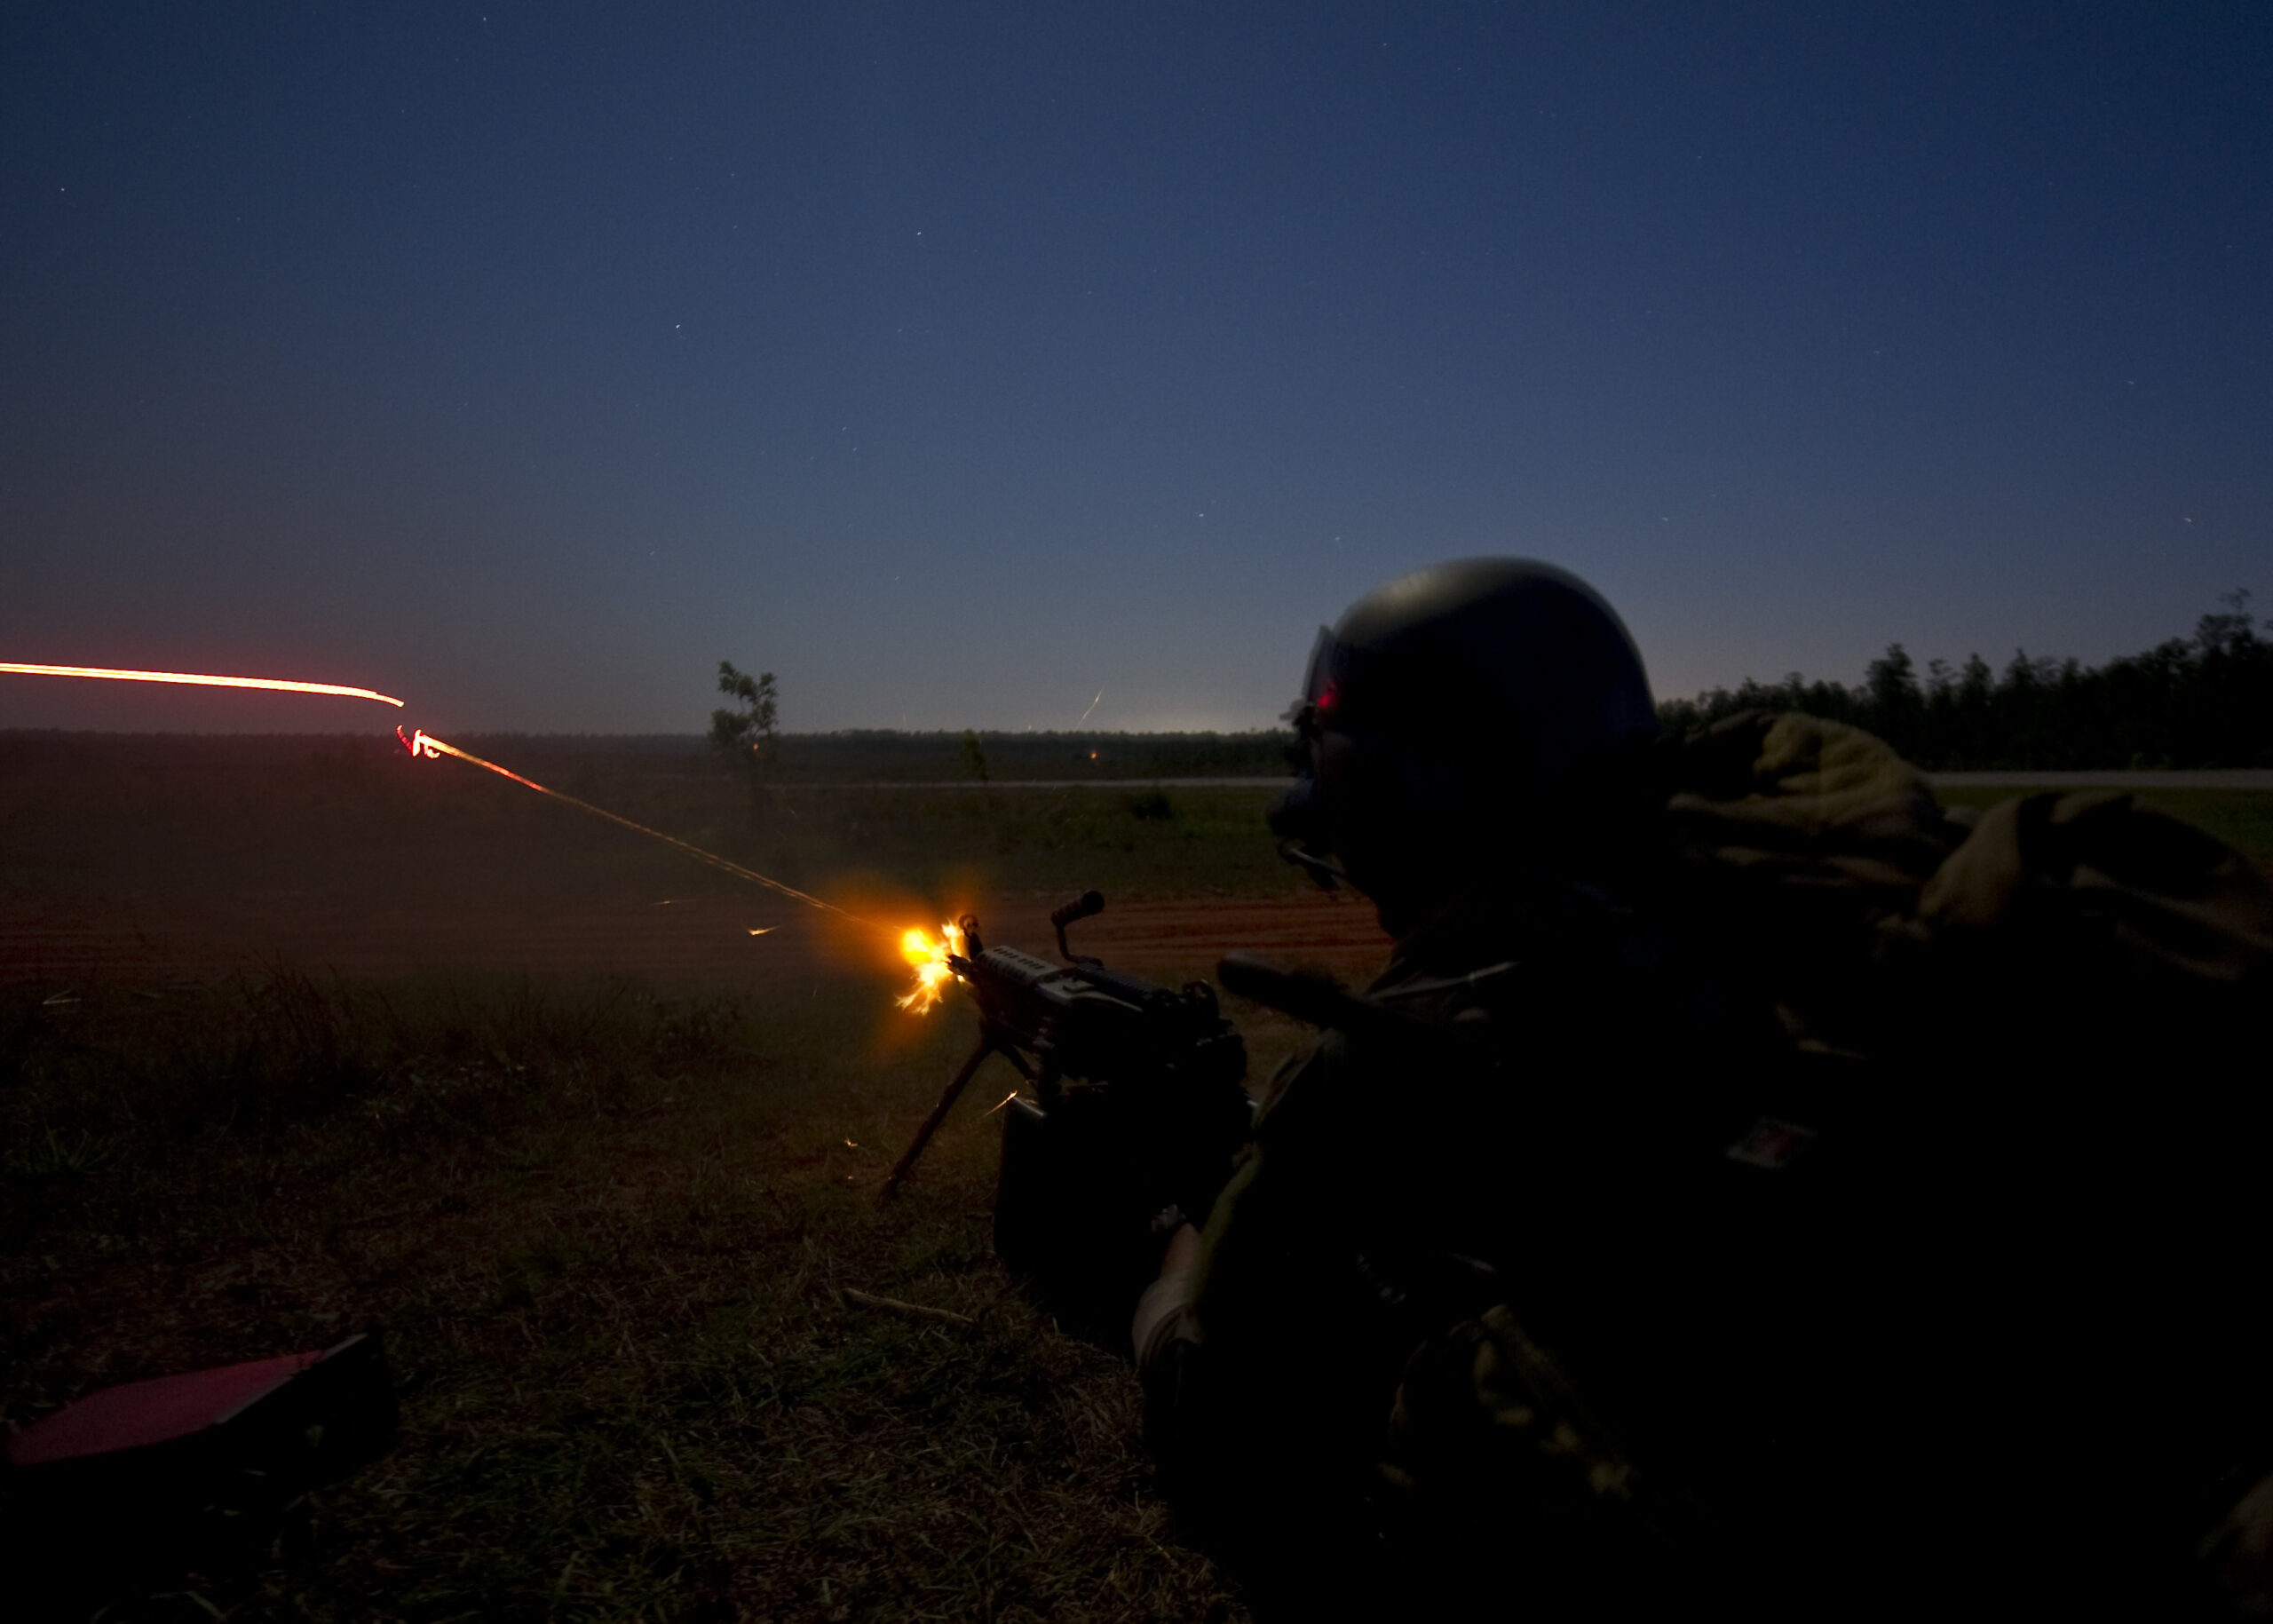 A Marine from 2nd Marine Special Operations Battalion fires at a training target during a live-fire exercise on Eglin Range, Fla., May 21, 2013. Marines fired several different machine guns and also used infrared laser to designate training targets for AC-130 Spooky gunship fire. (U.S. Air Force Photo/ Staff Sgt. John Bainter)